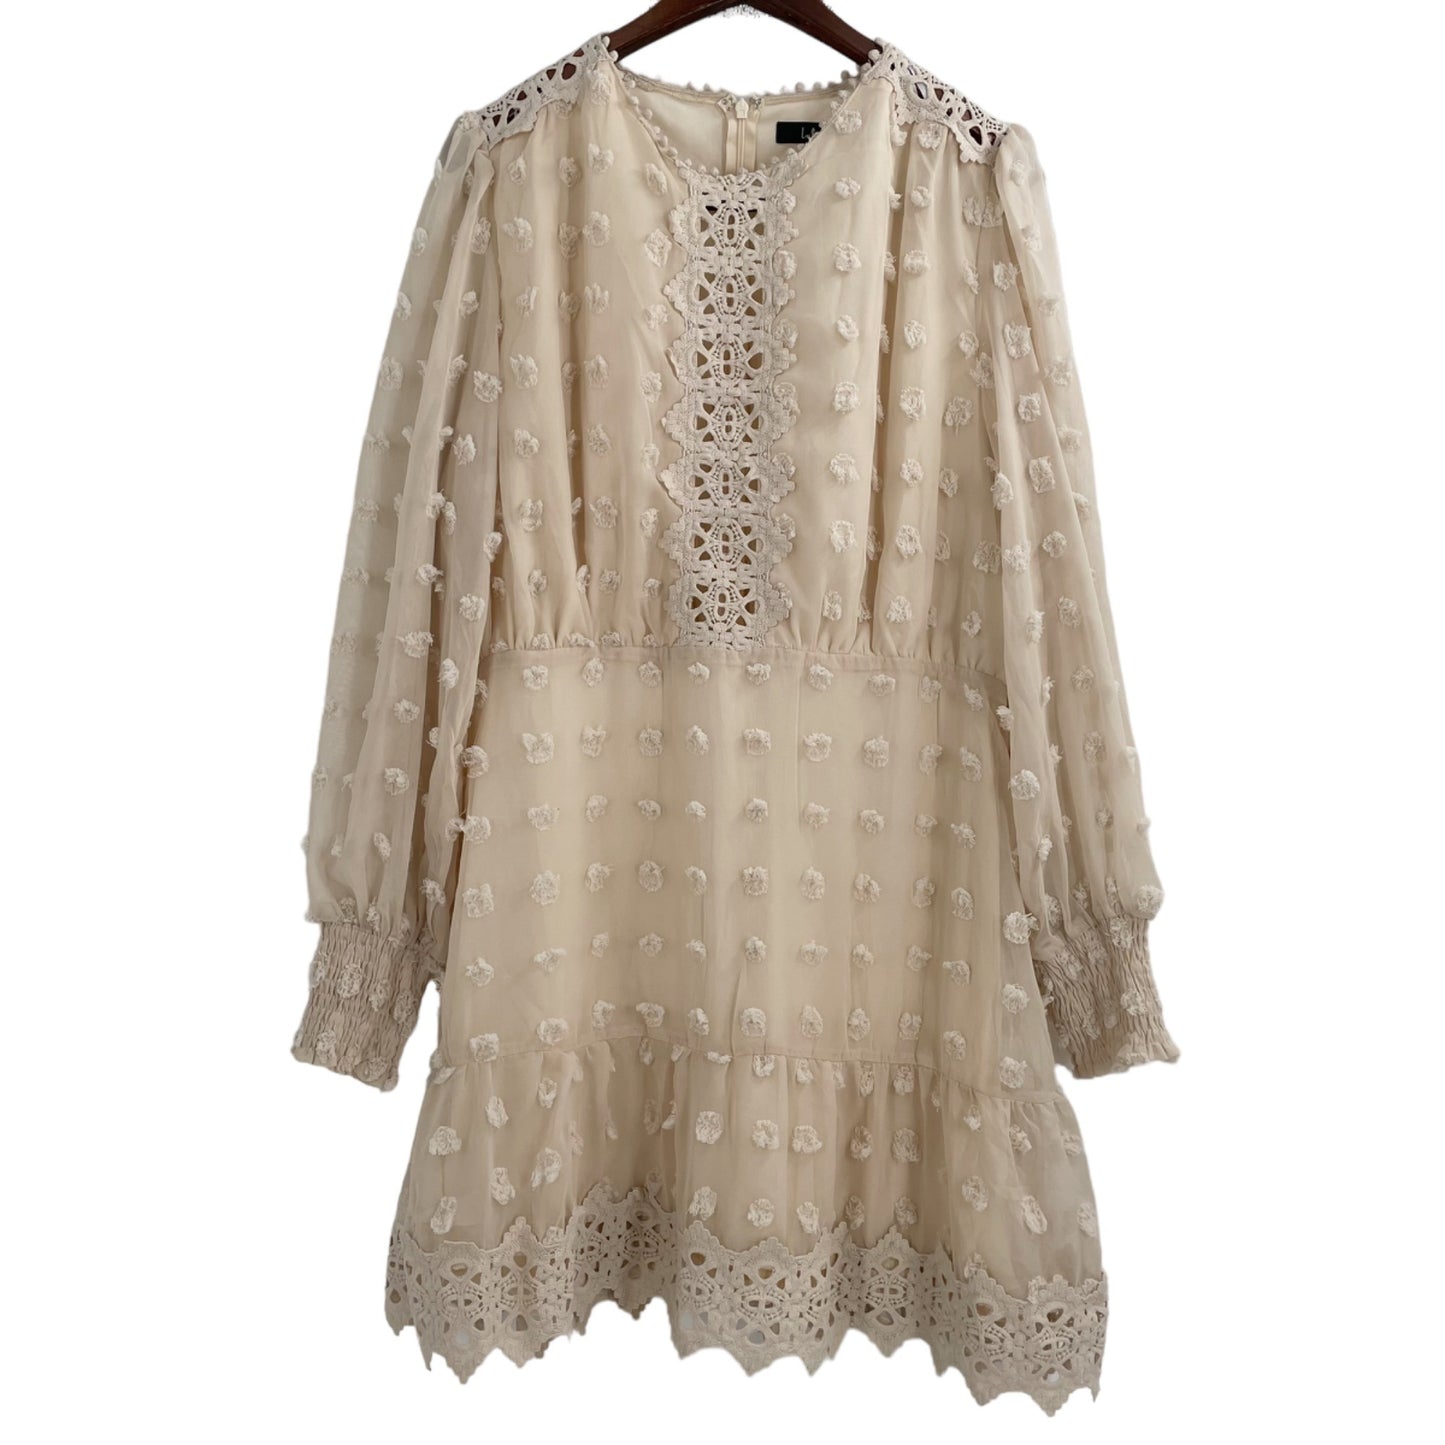 Lulu's Love Or Lust Cream Embroidered Lace Long Sleeve Mini Dress Womens Size XL